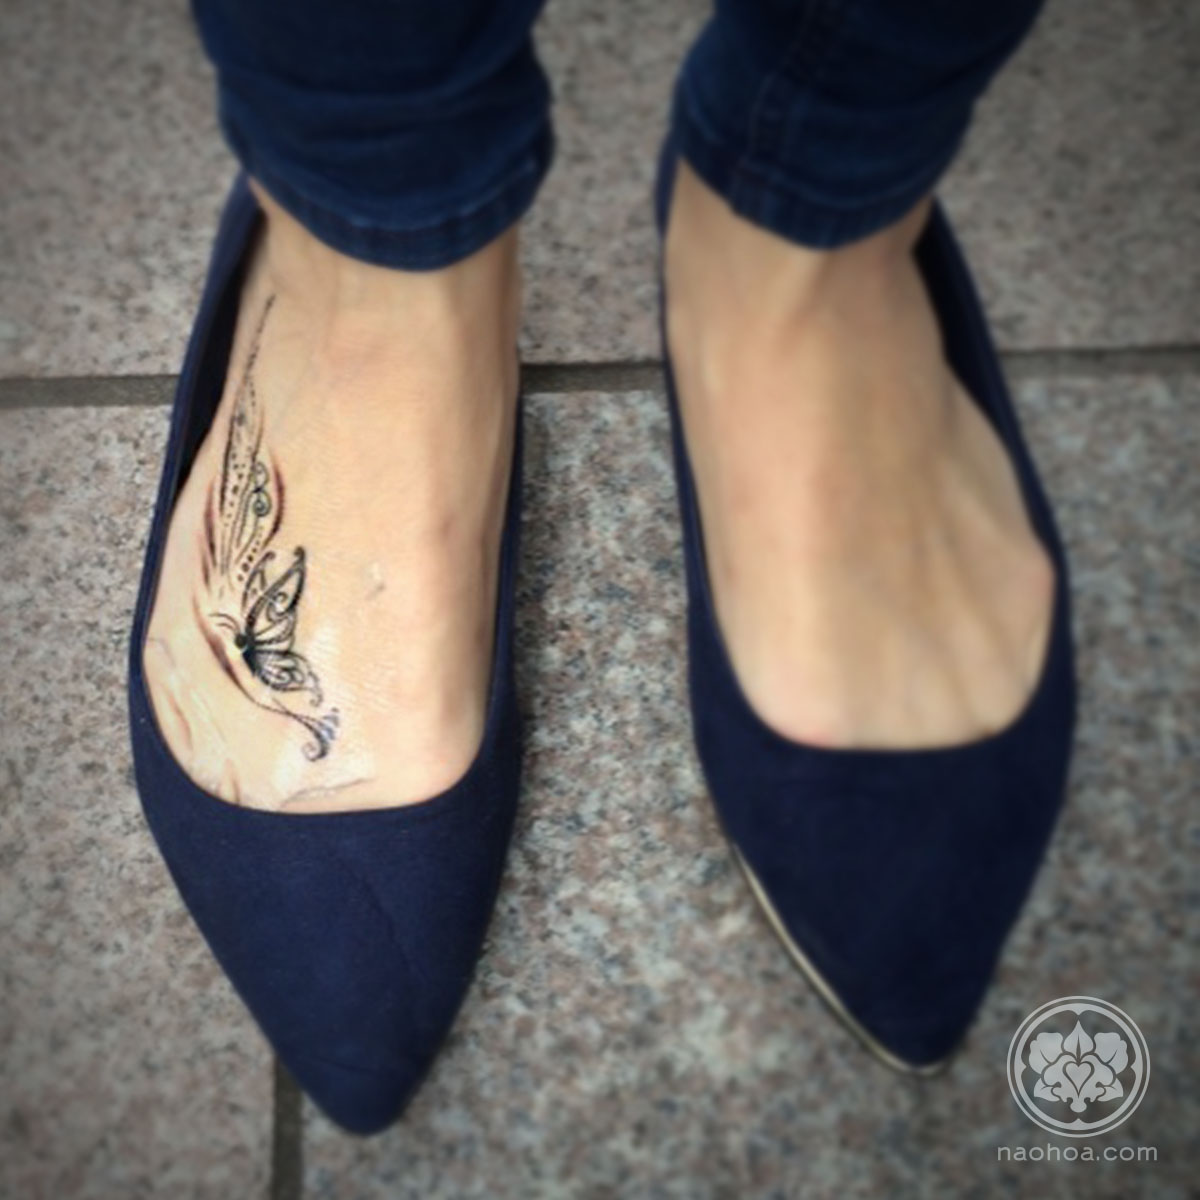 An un-healed tattoo of a butterfly and ornate decoration on the right foot.